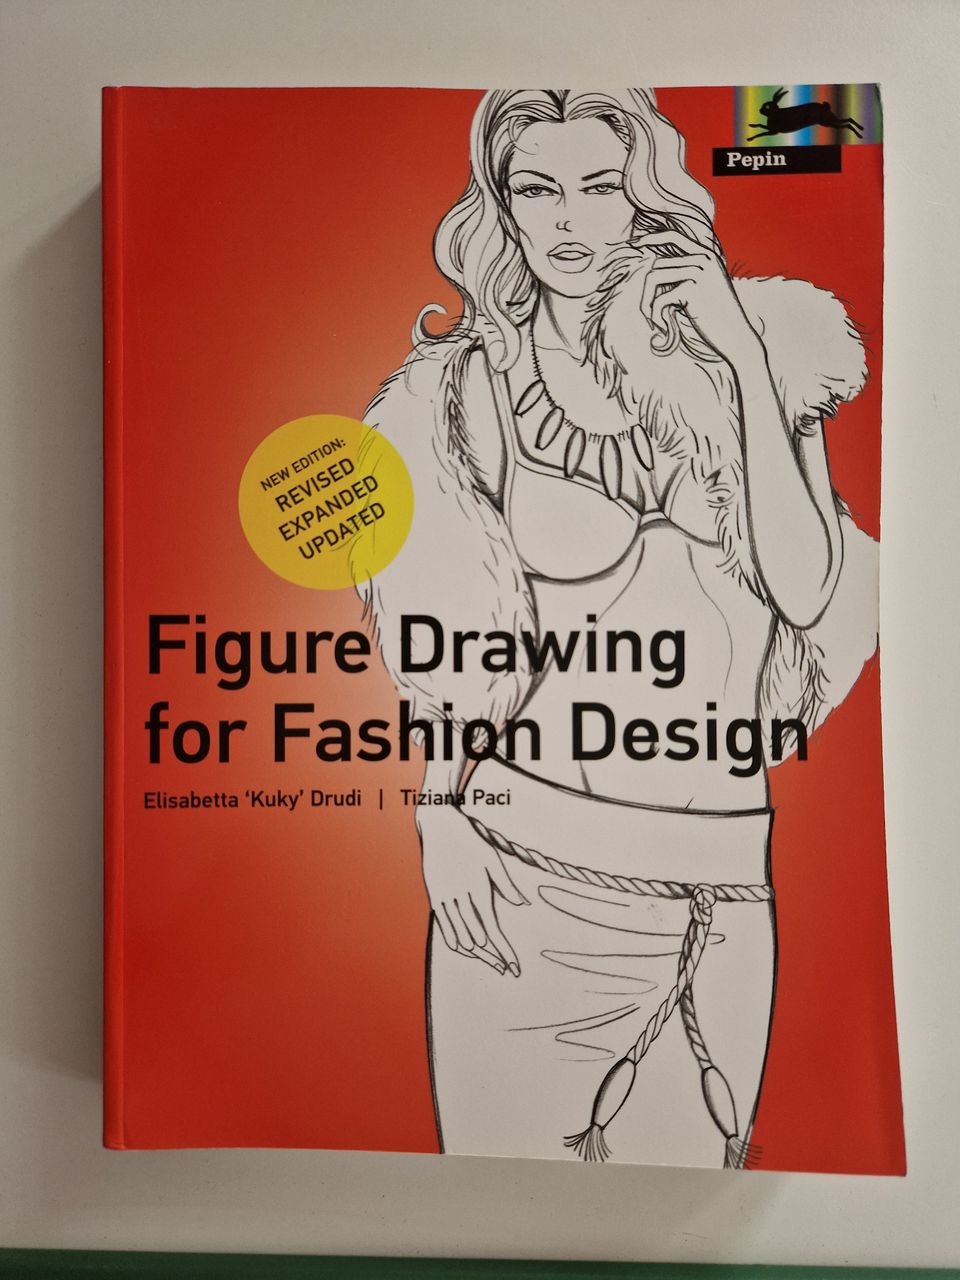 Figure drawing for fashion design